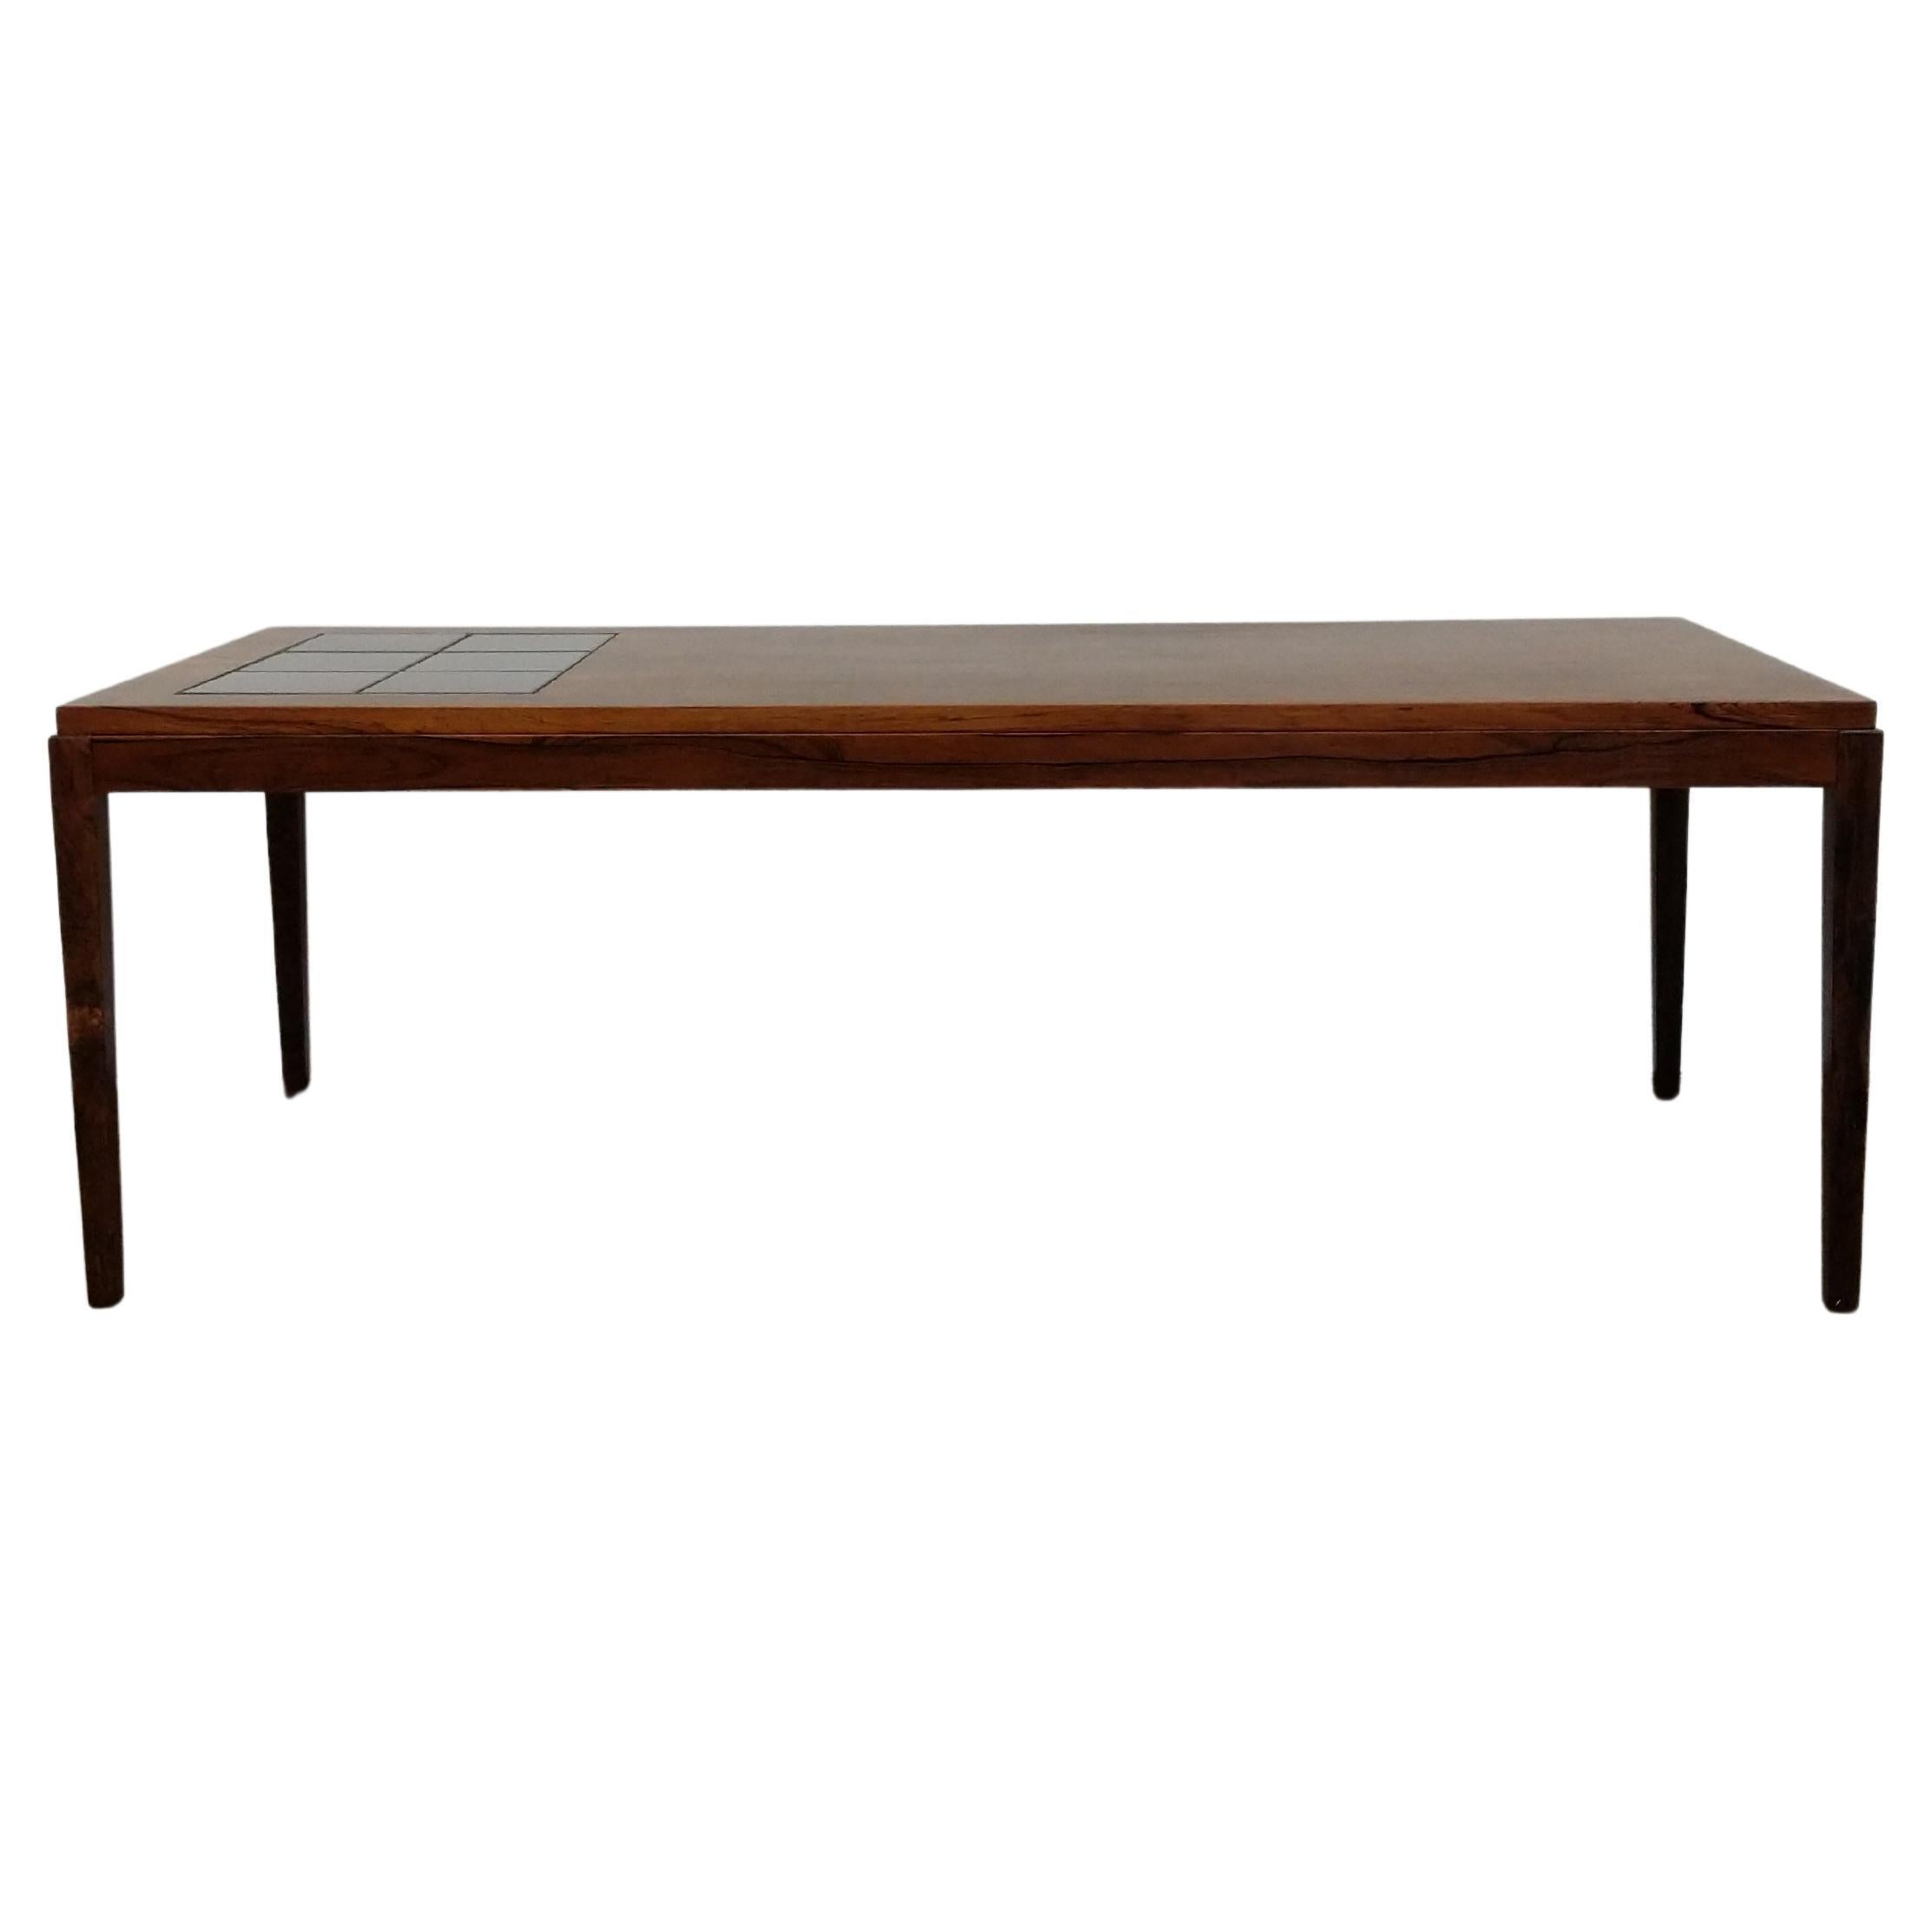 Vintage Danish Mid Century Modern Rosewood Coffee Table For Sale